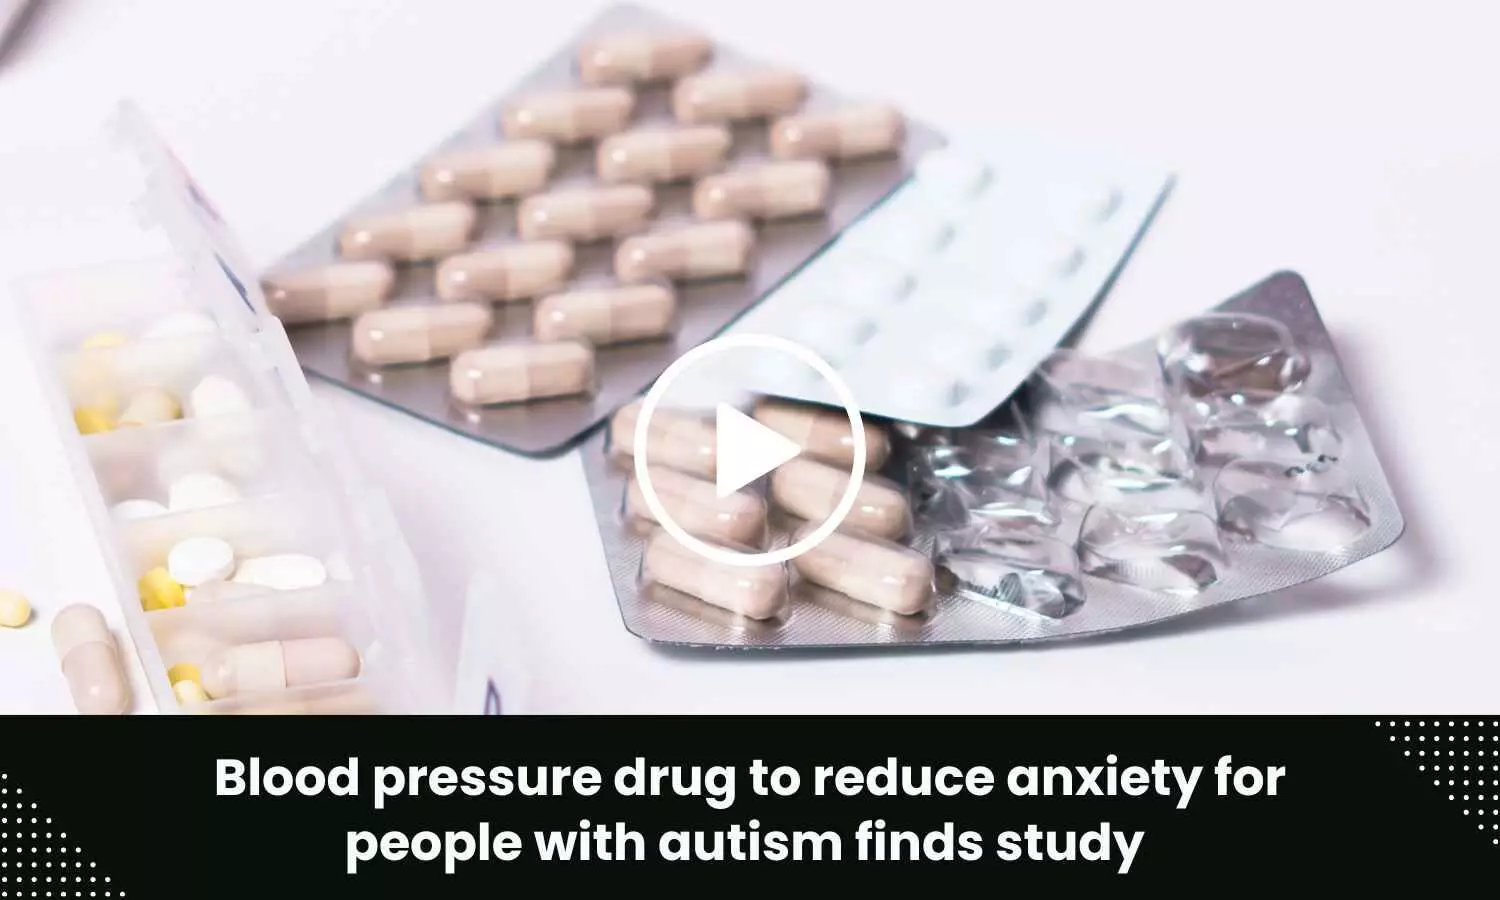 Blood pressure drug to reduce anxiety for people with autism finds study